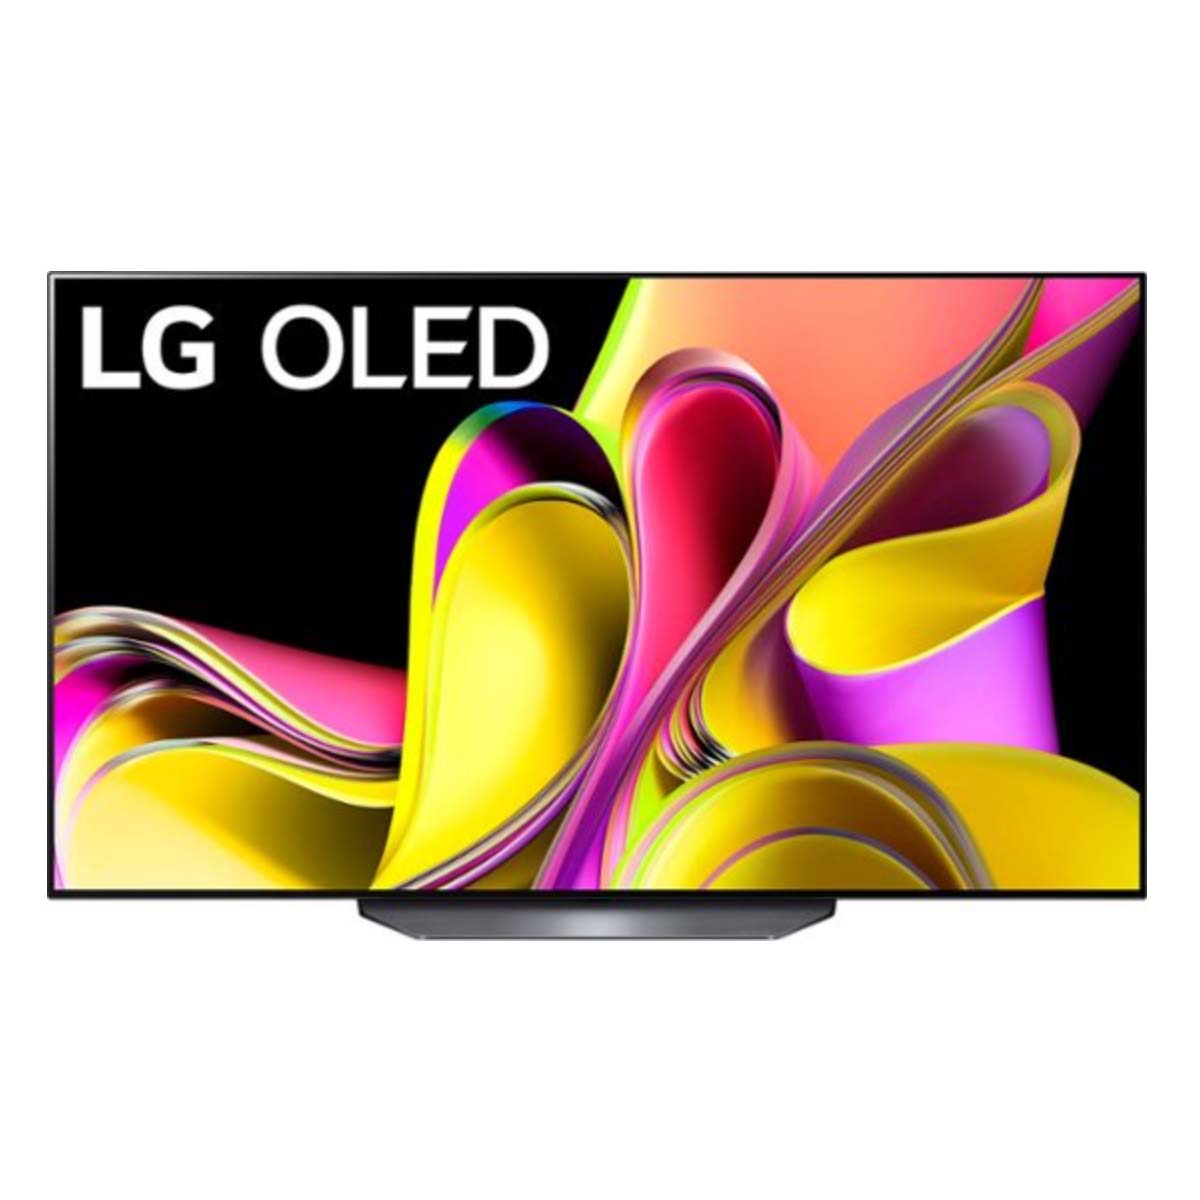 LG TV with colorful screen display